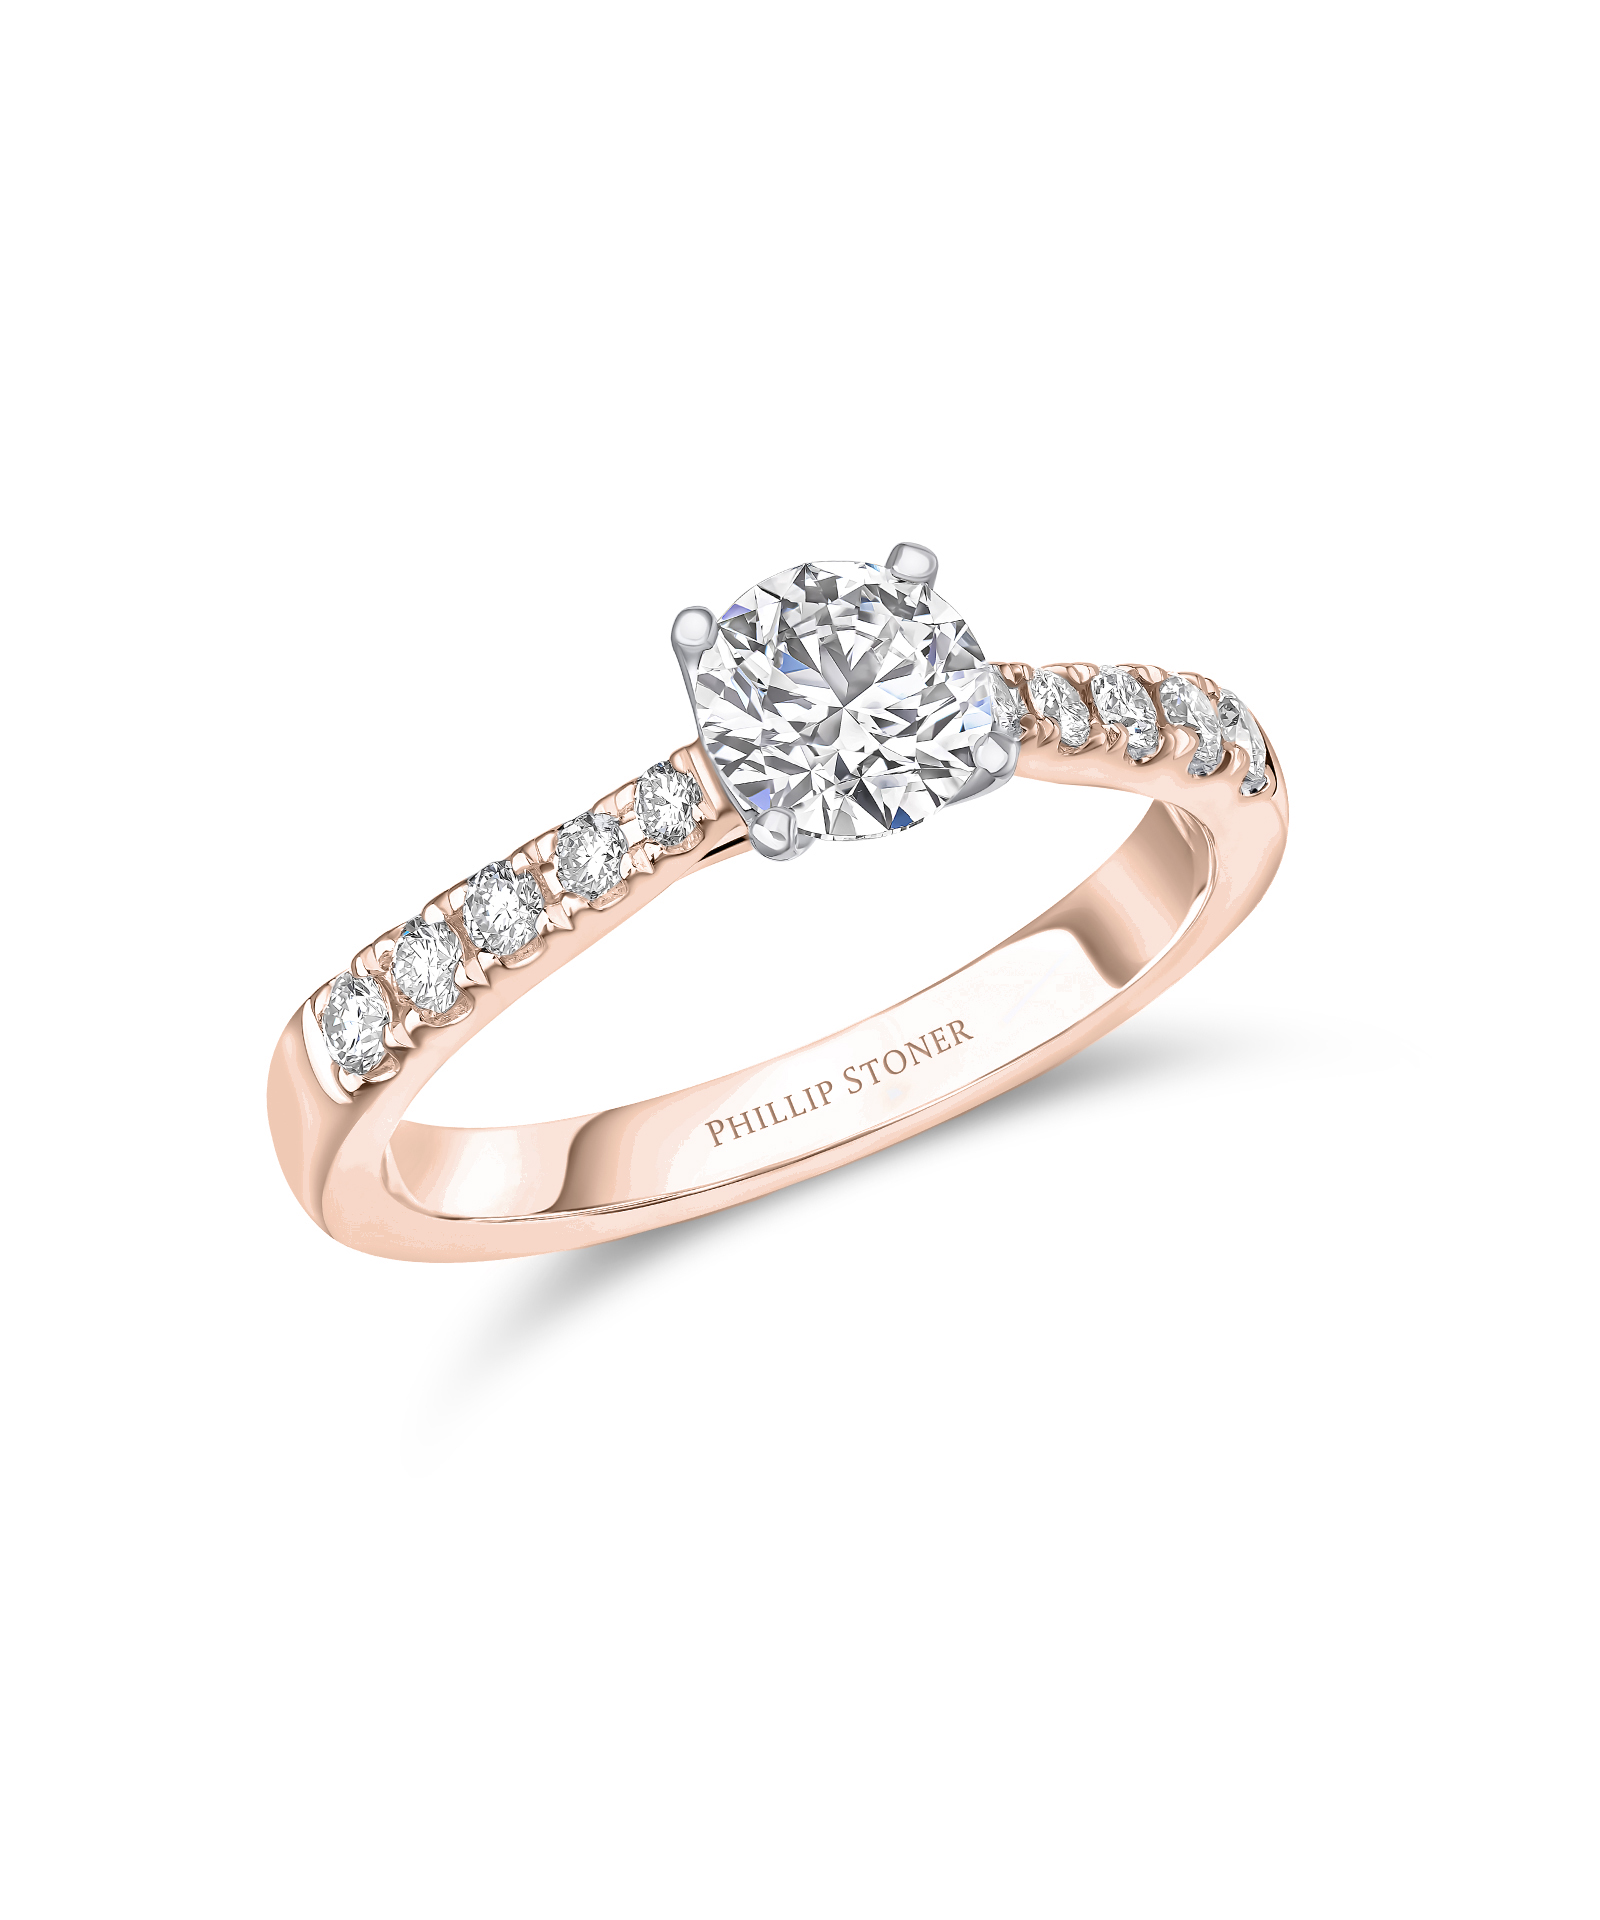 0.70ct Round Brilliant Cut Diamond Rose Gold Engagement Ring with Scallop Set Shoulders - Phillip Stoner The Jeweller